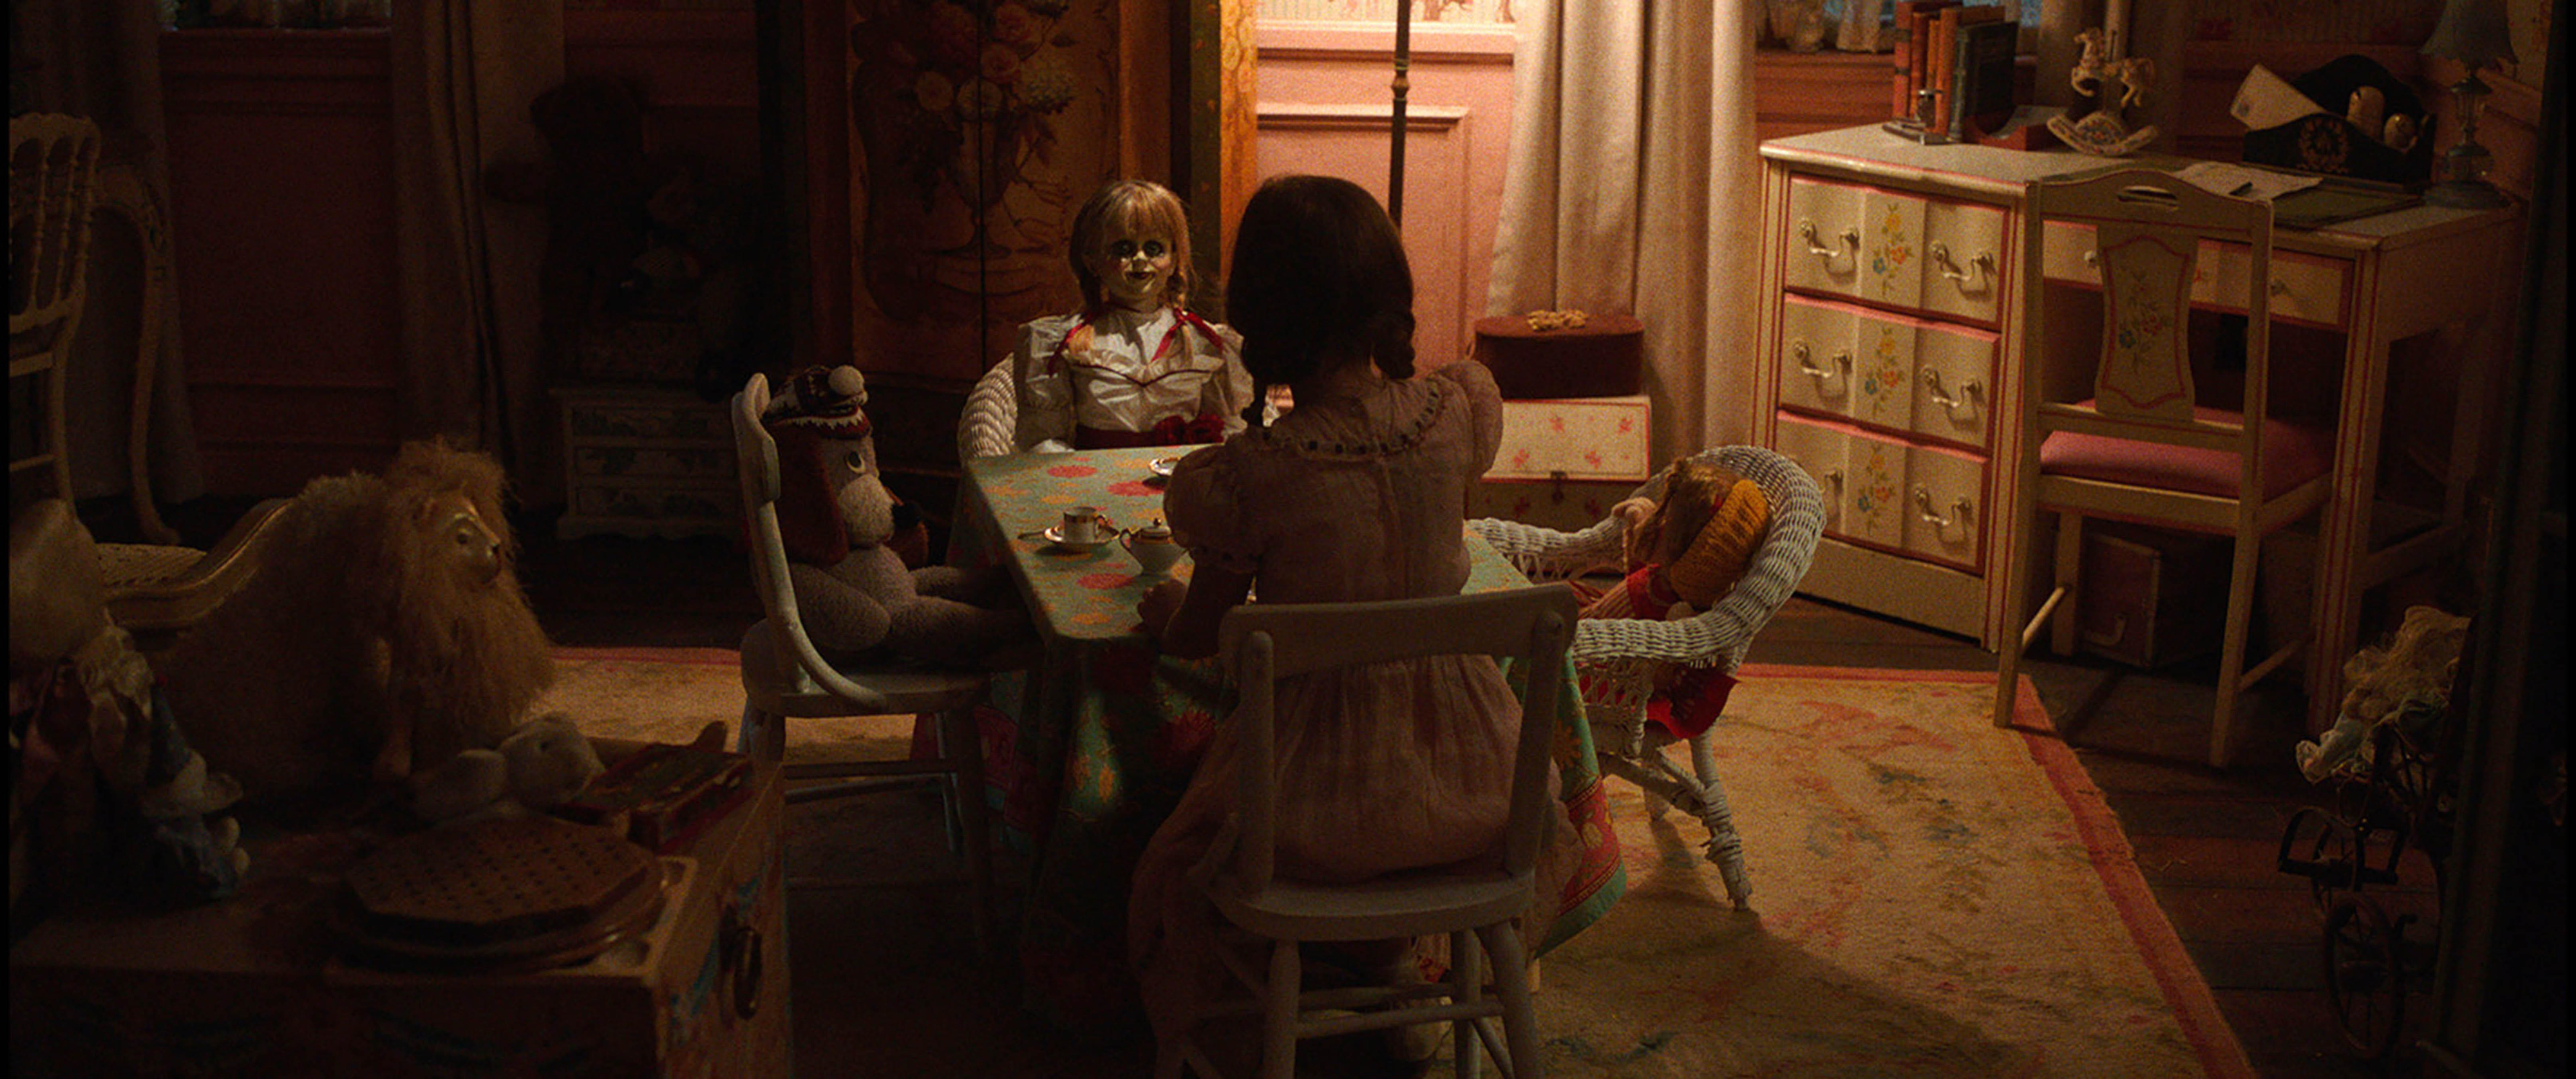 A young girl has a pretend tea party with a terrifying doll